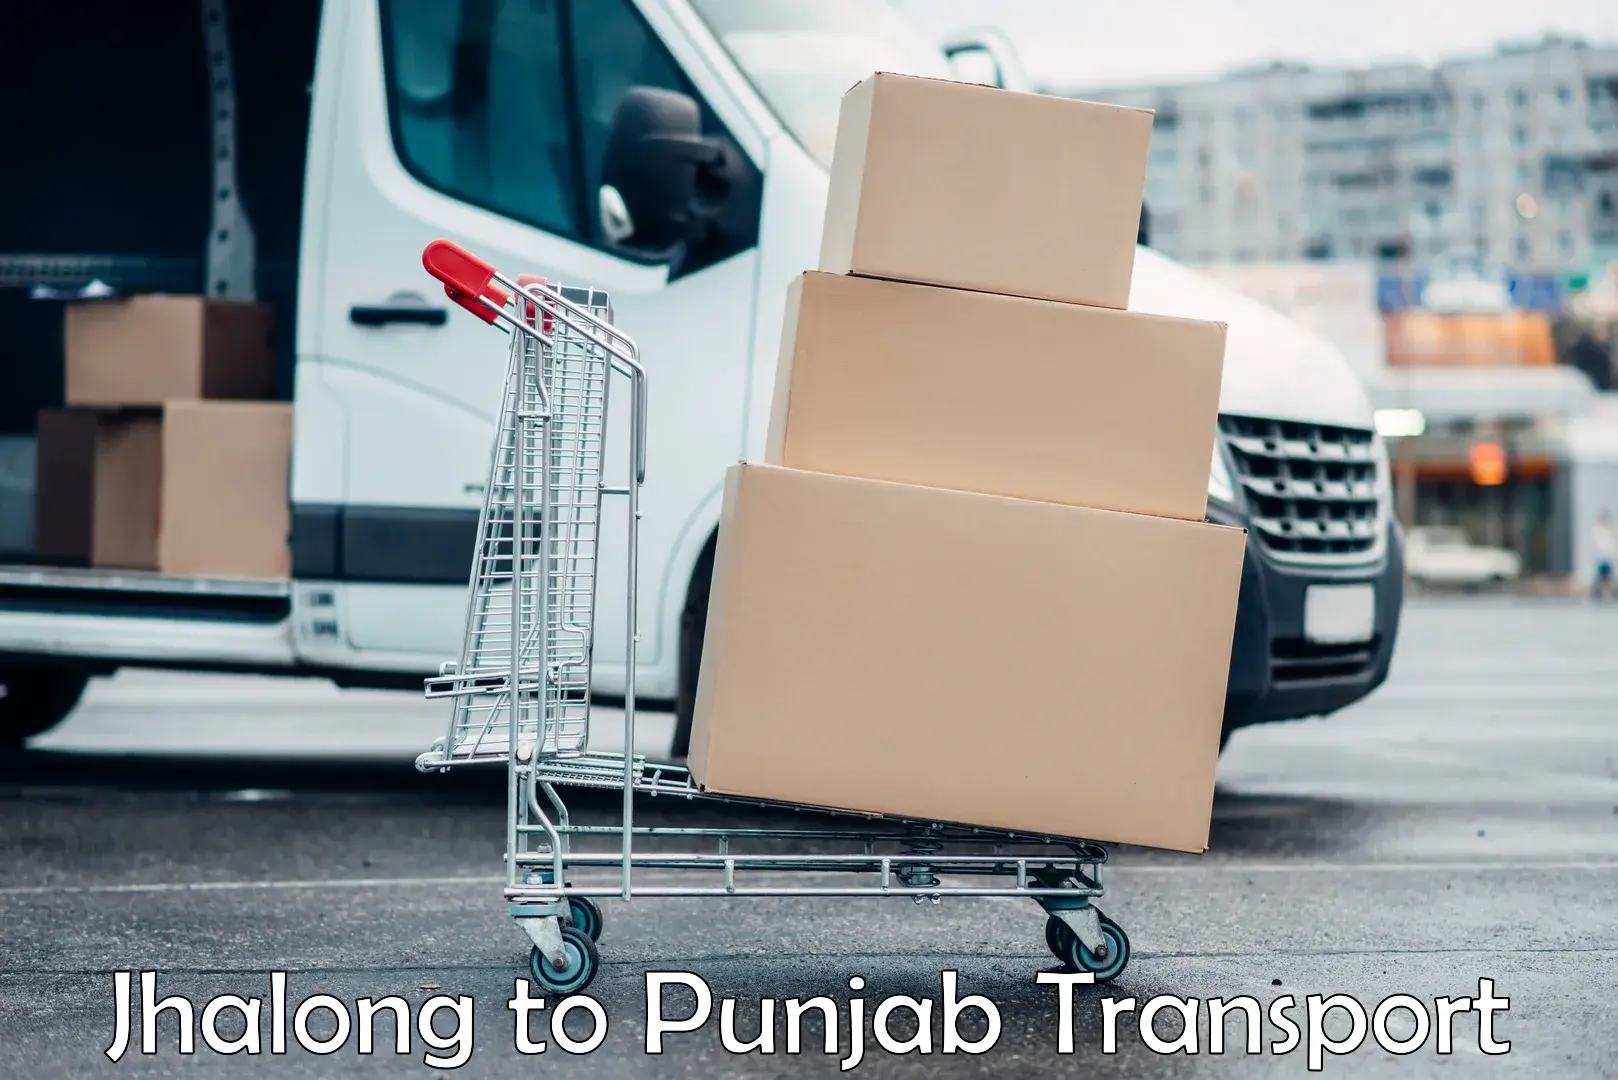 Road transport online services Jhalong to Sultanpur Lodhi